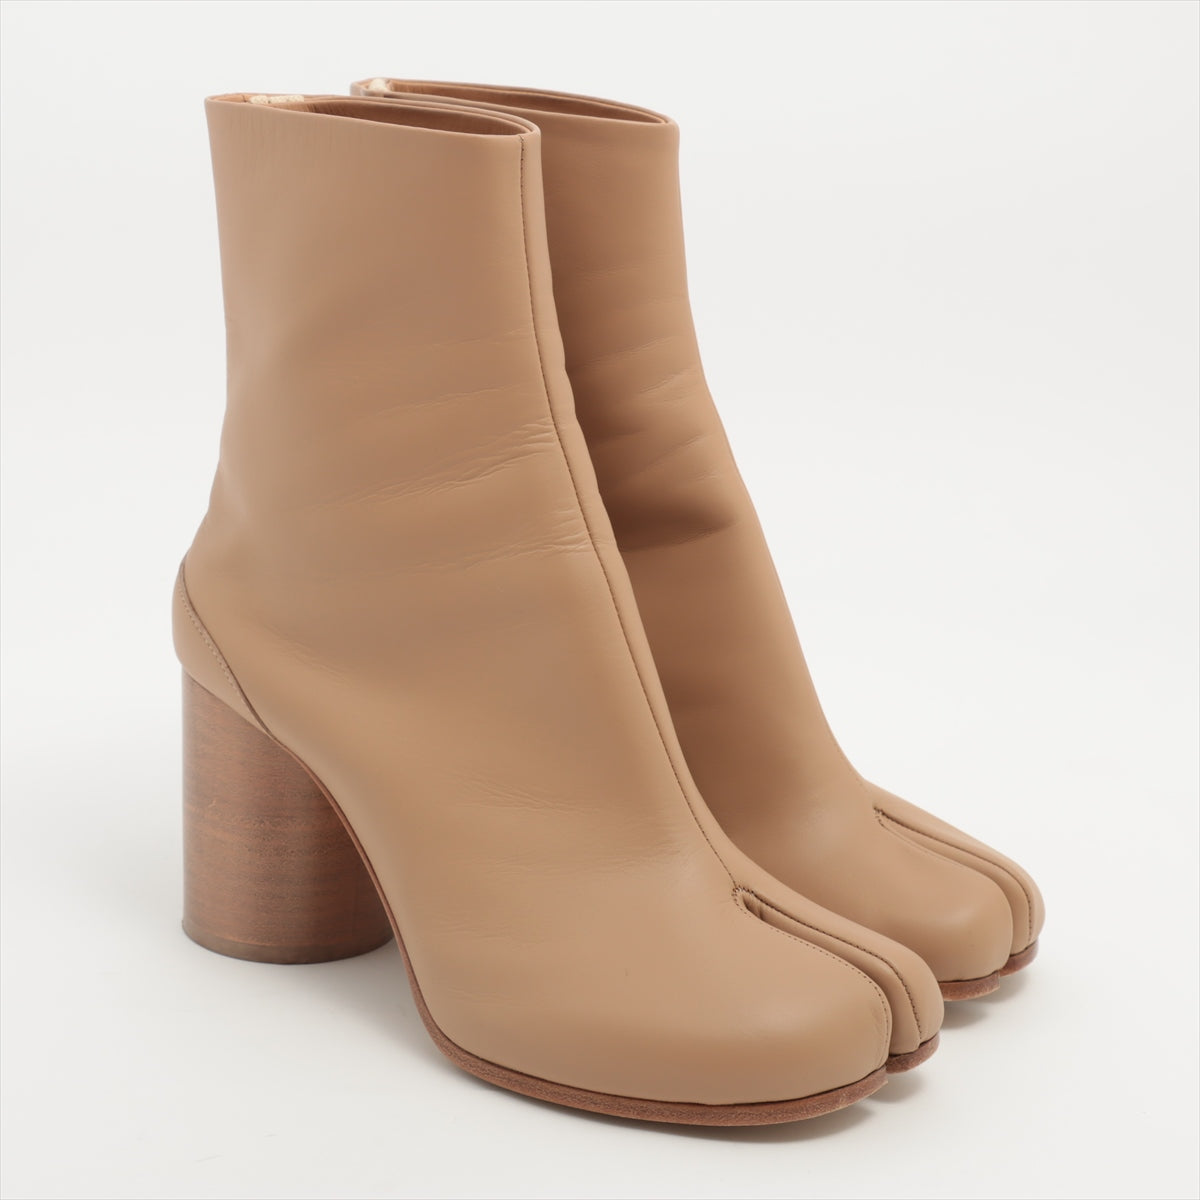 Maison Margiela TABI Leather Short Boots 37 Ladies' Beige Is there dirt on the insole